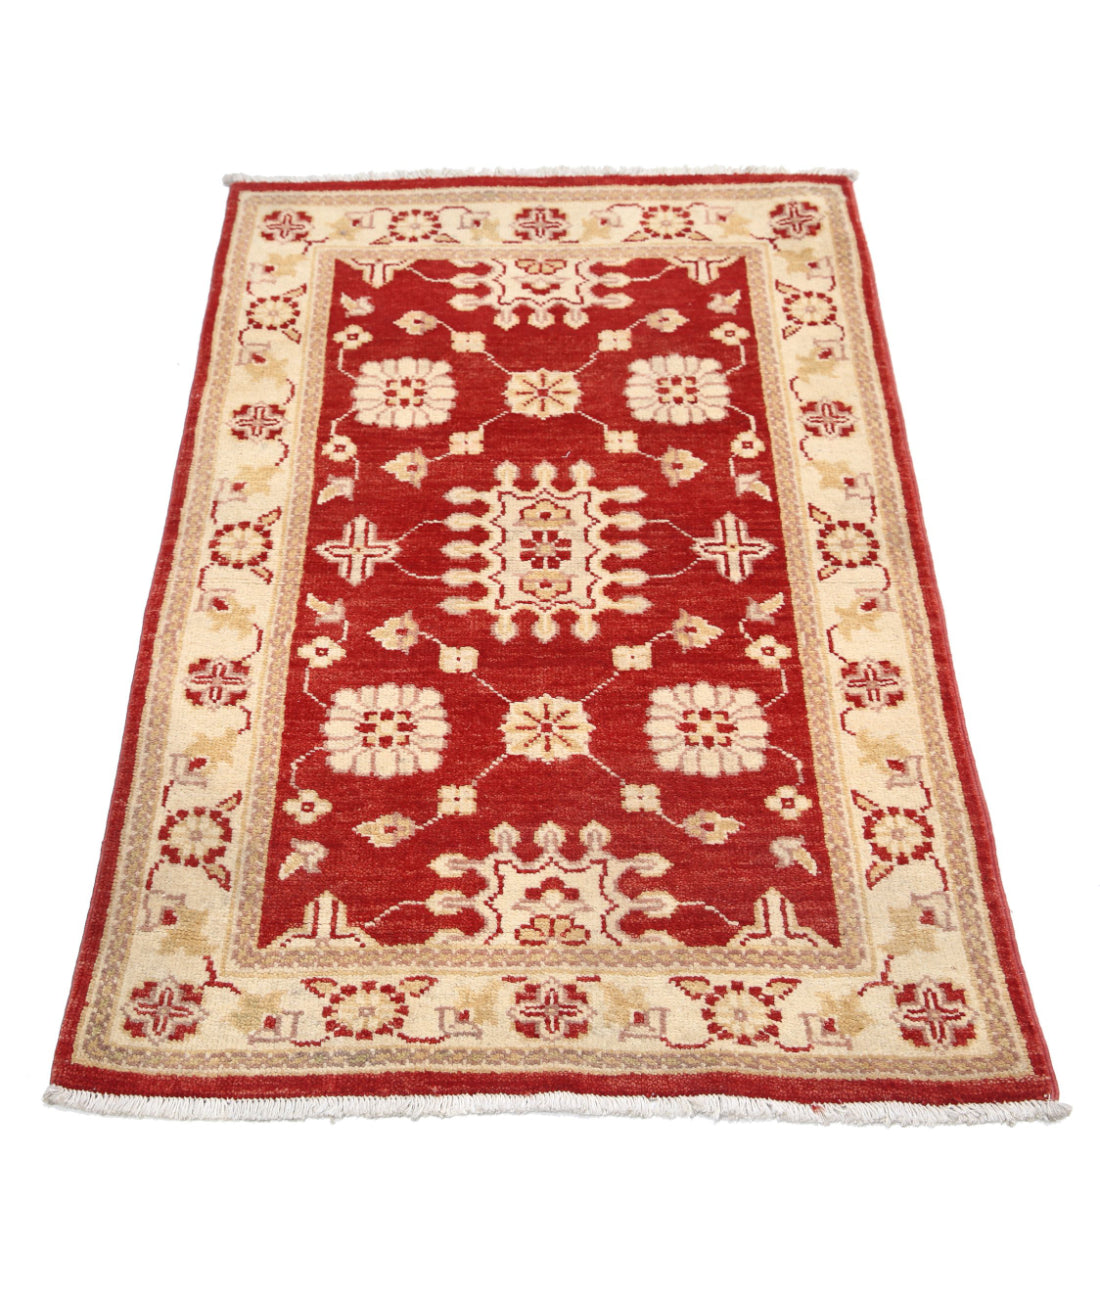 Ziegler 2'6'' X 4'0'' Hand-Knotted Wool Rug 2'6'' x 4'0'' (75 X 120) / Red / N/A